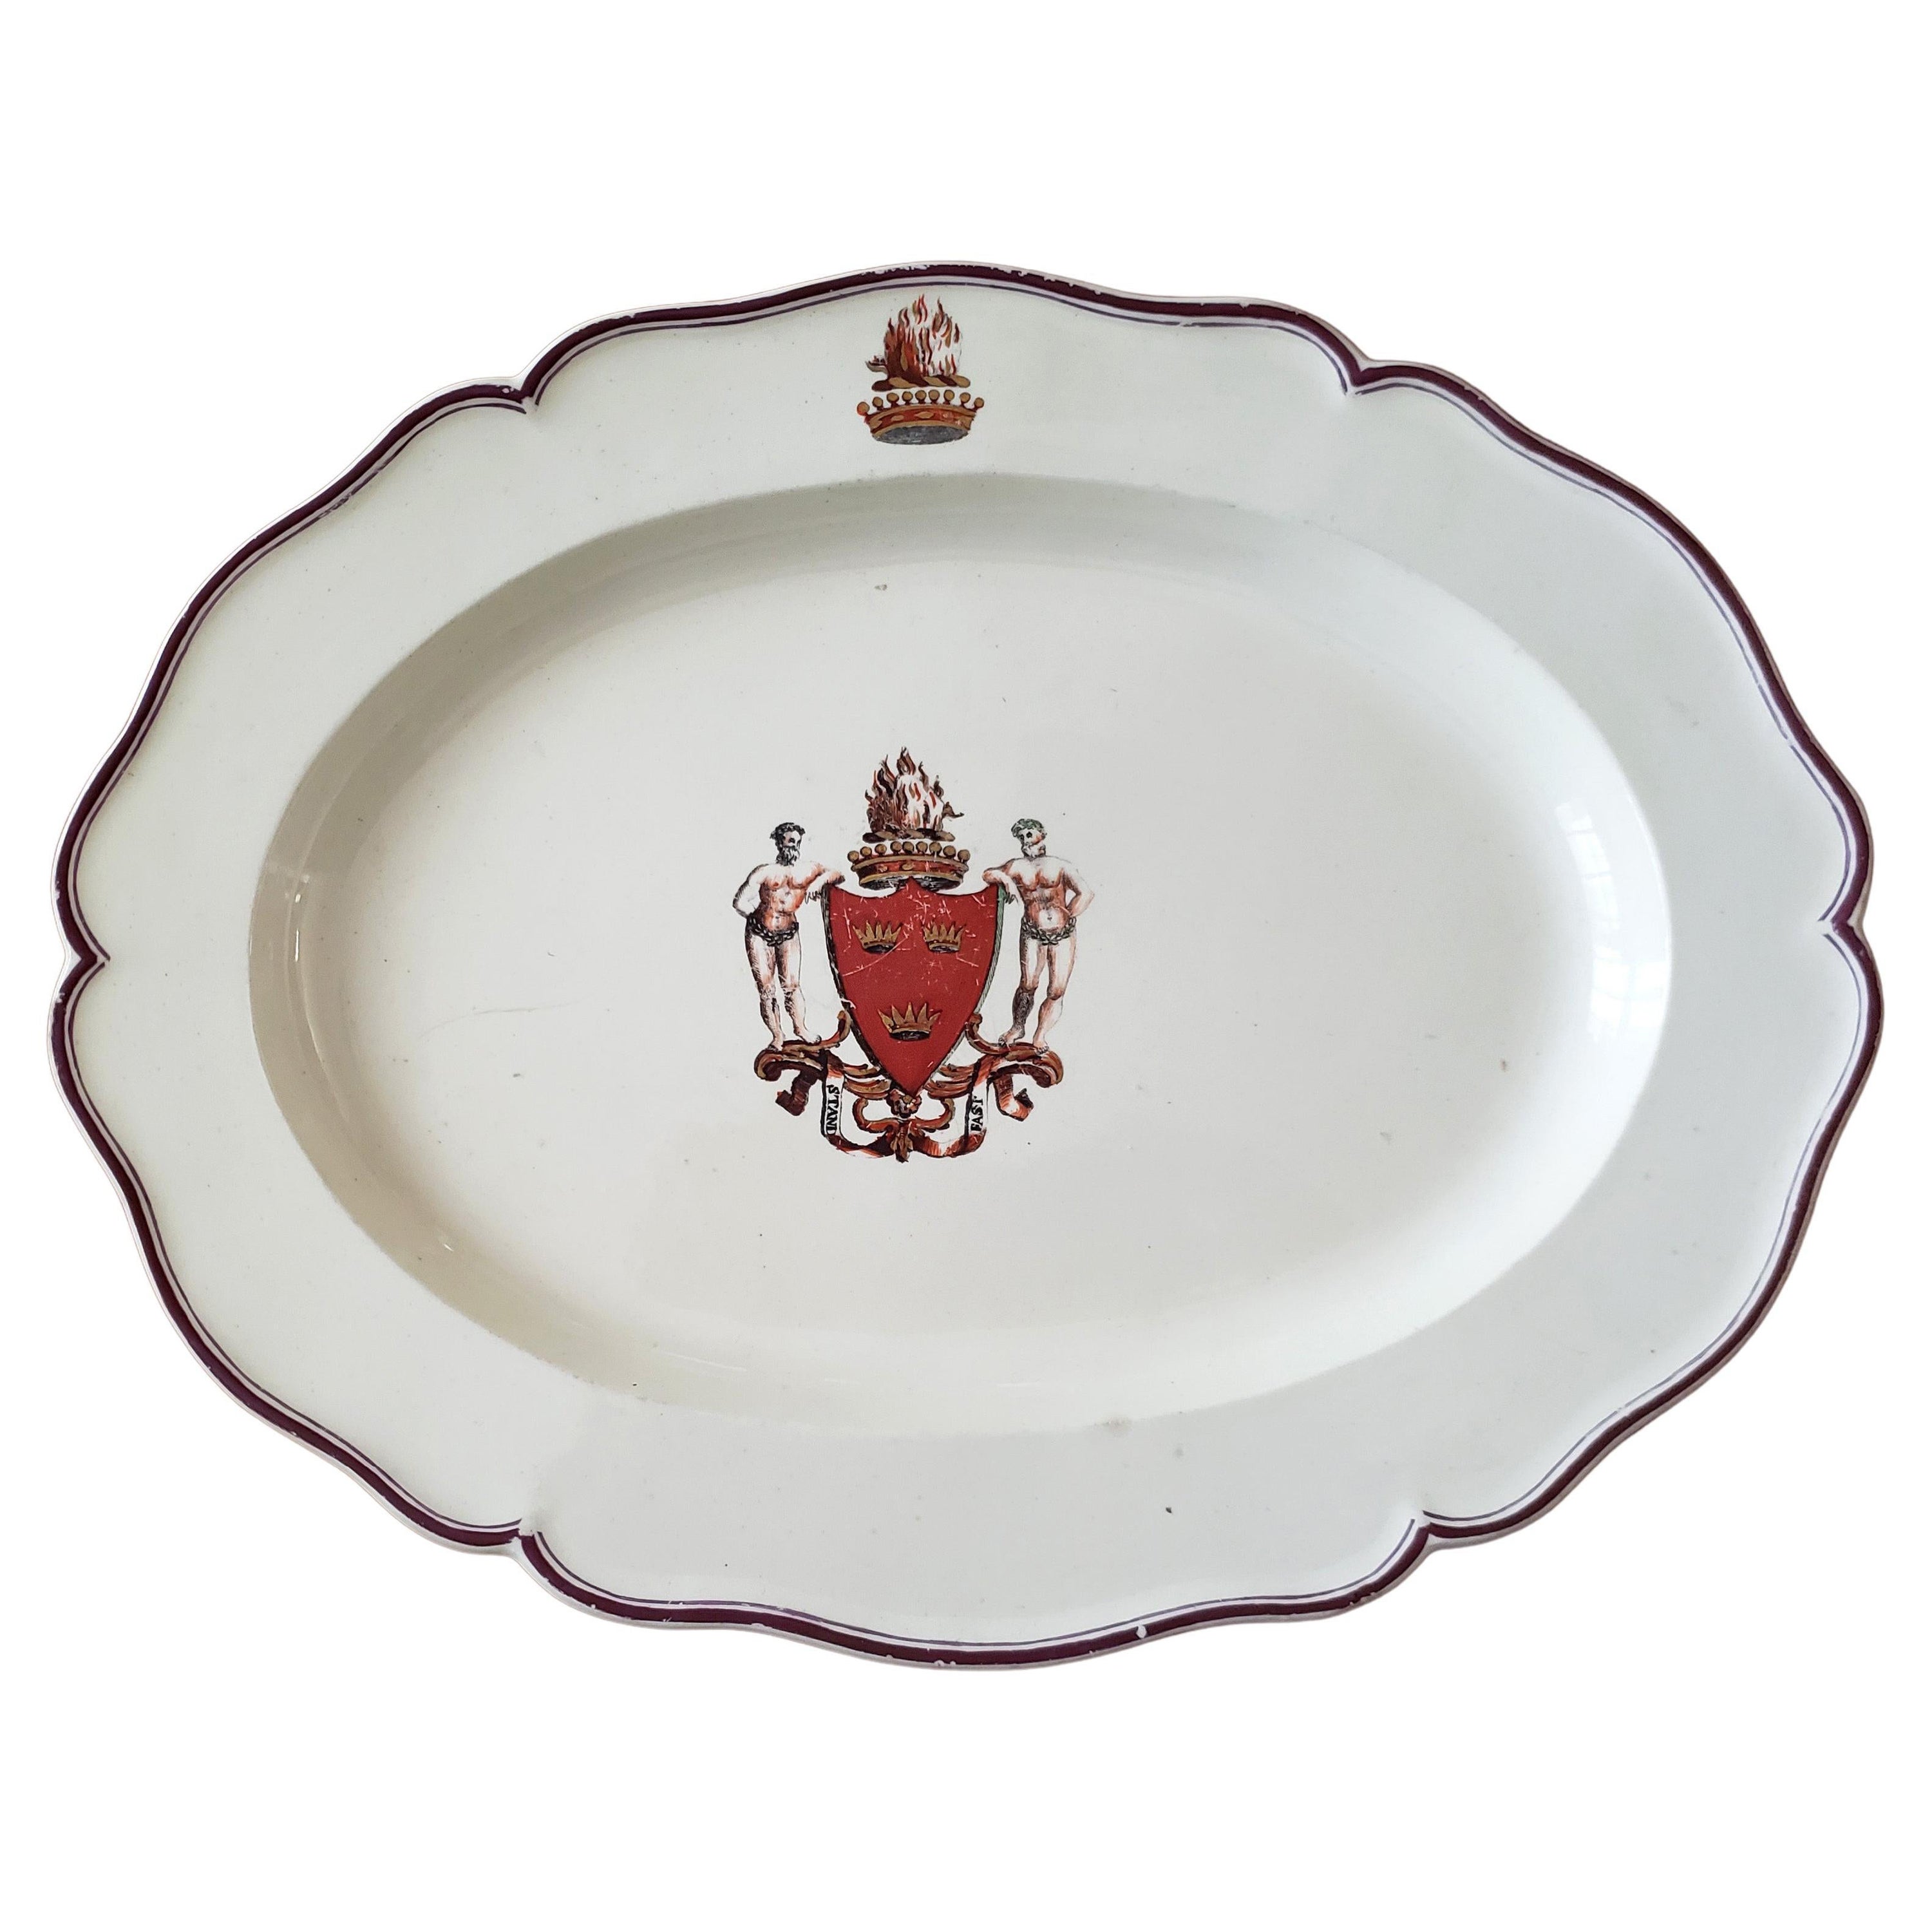 Creamware Armorial Dish, Possibly Melbourne, Scottish Arms of Grant